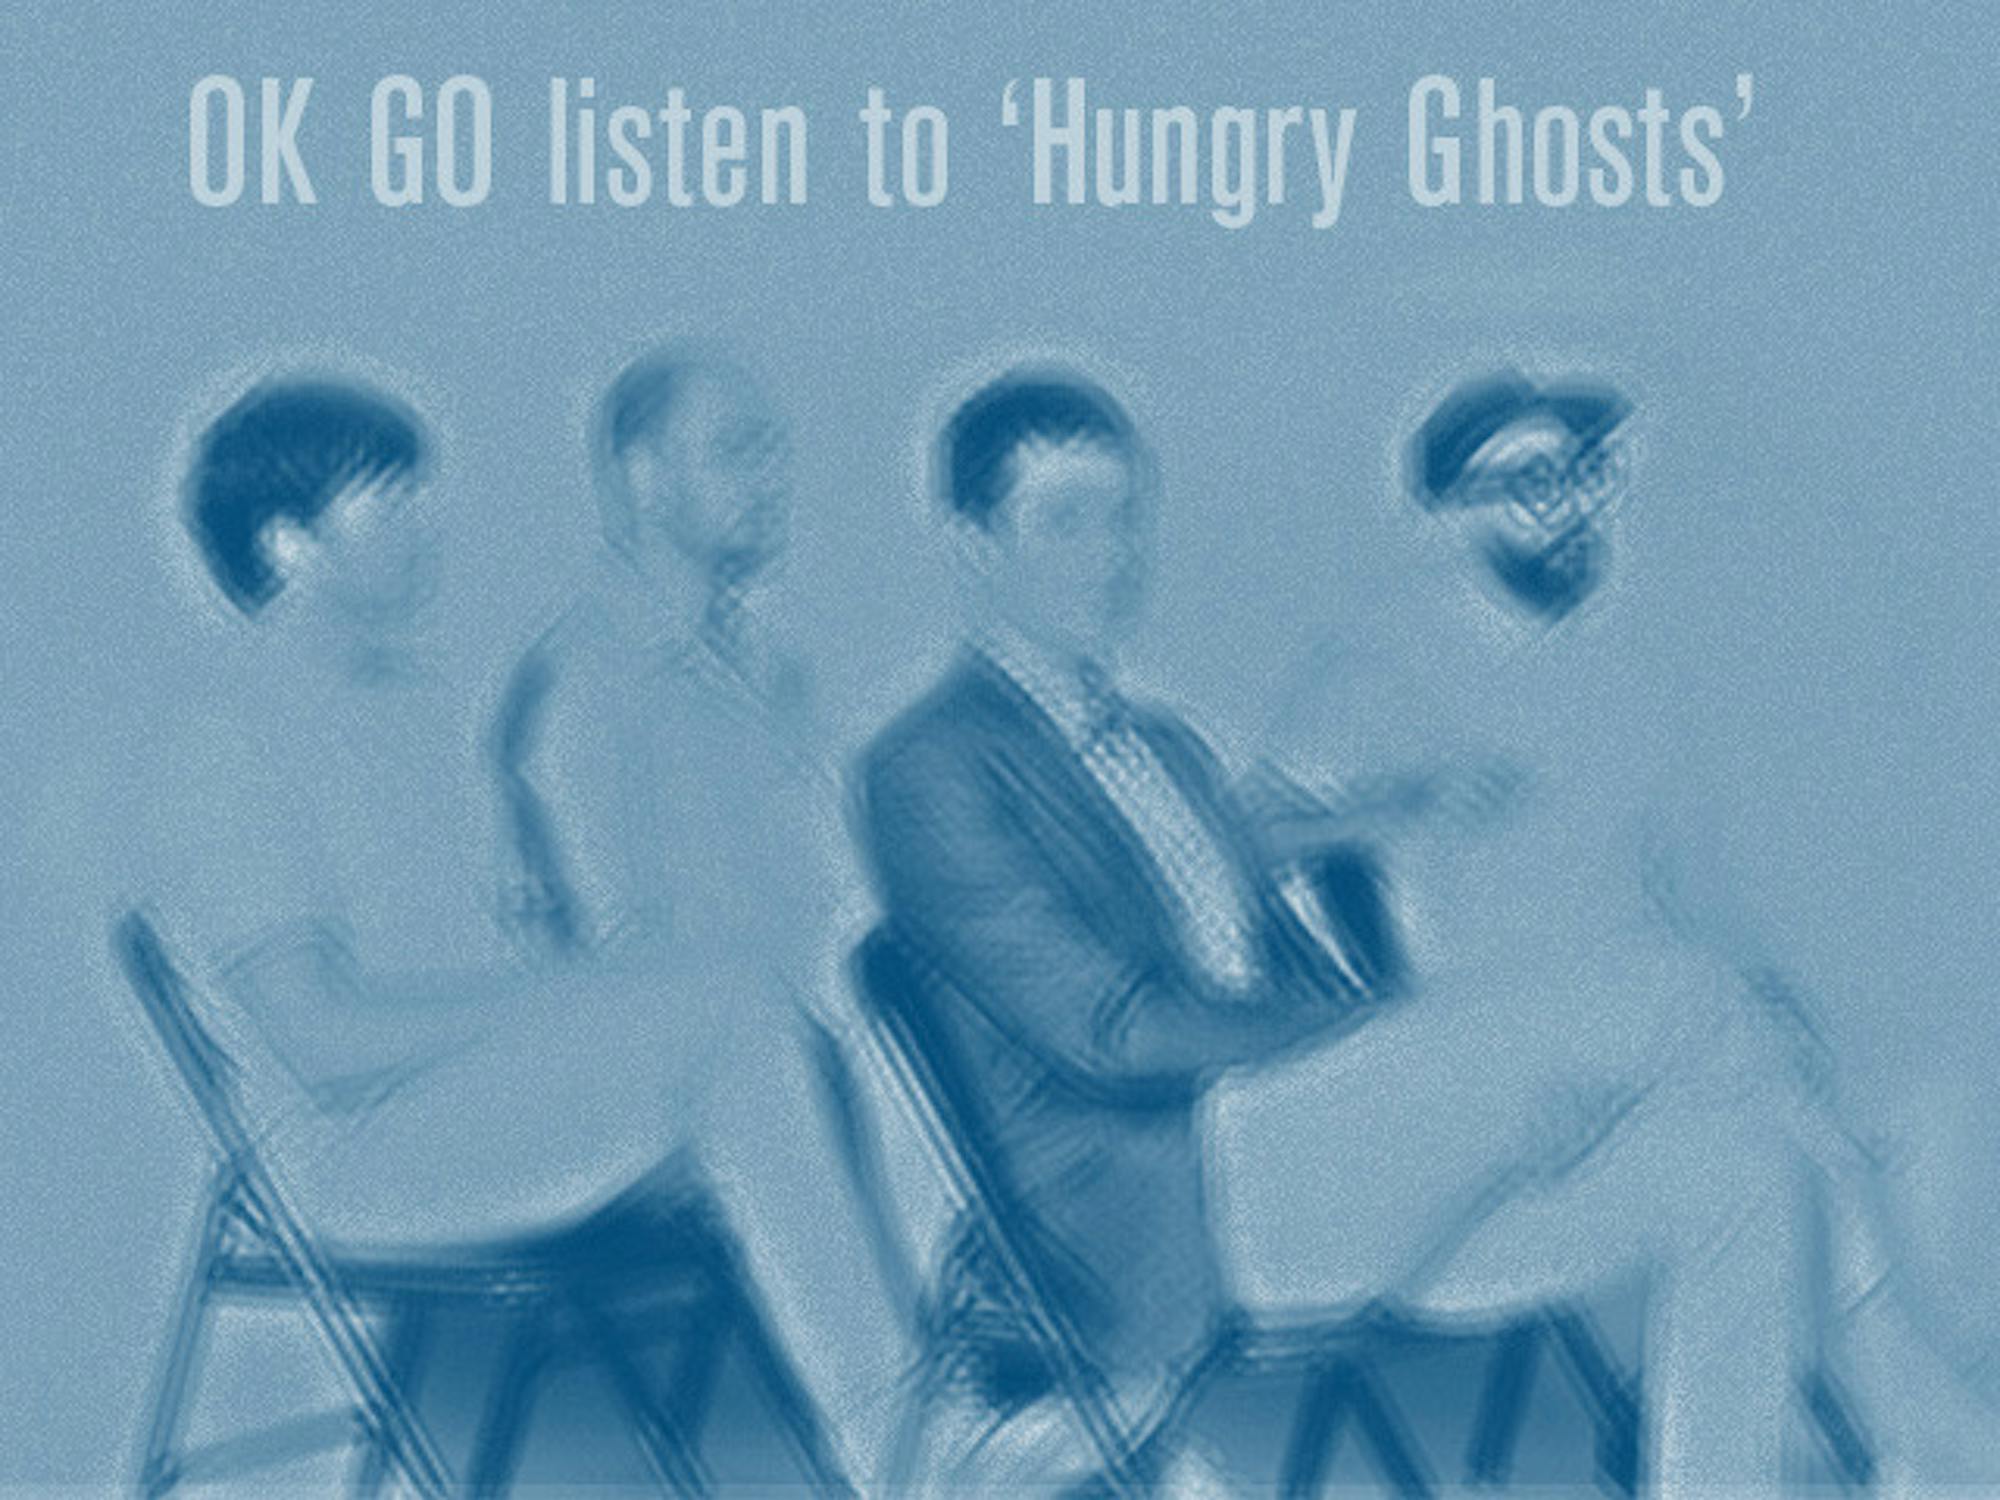 Web_ok go listen to hungry ghosts_10-26-2014